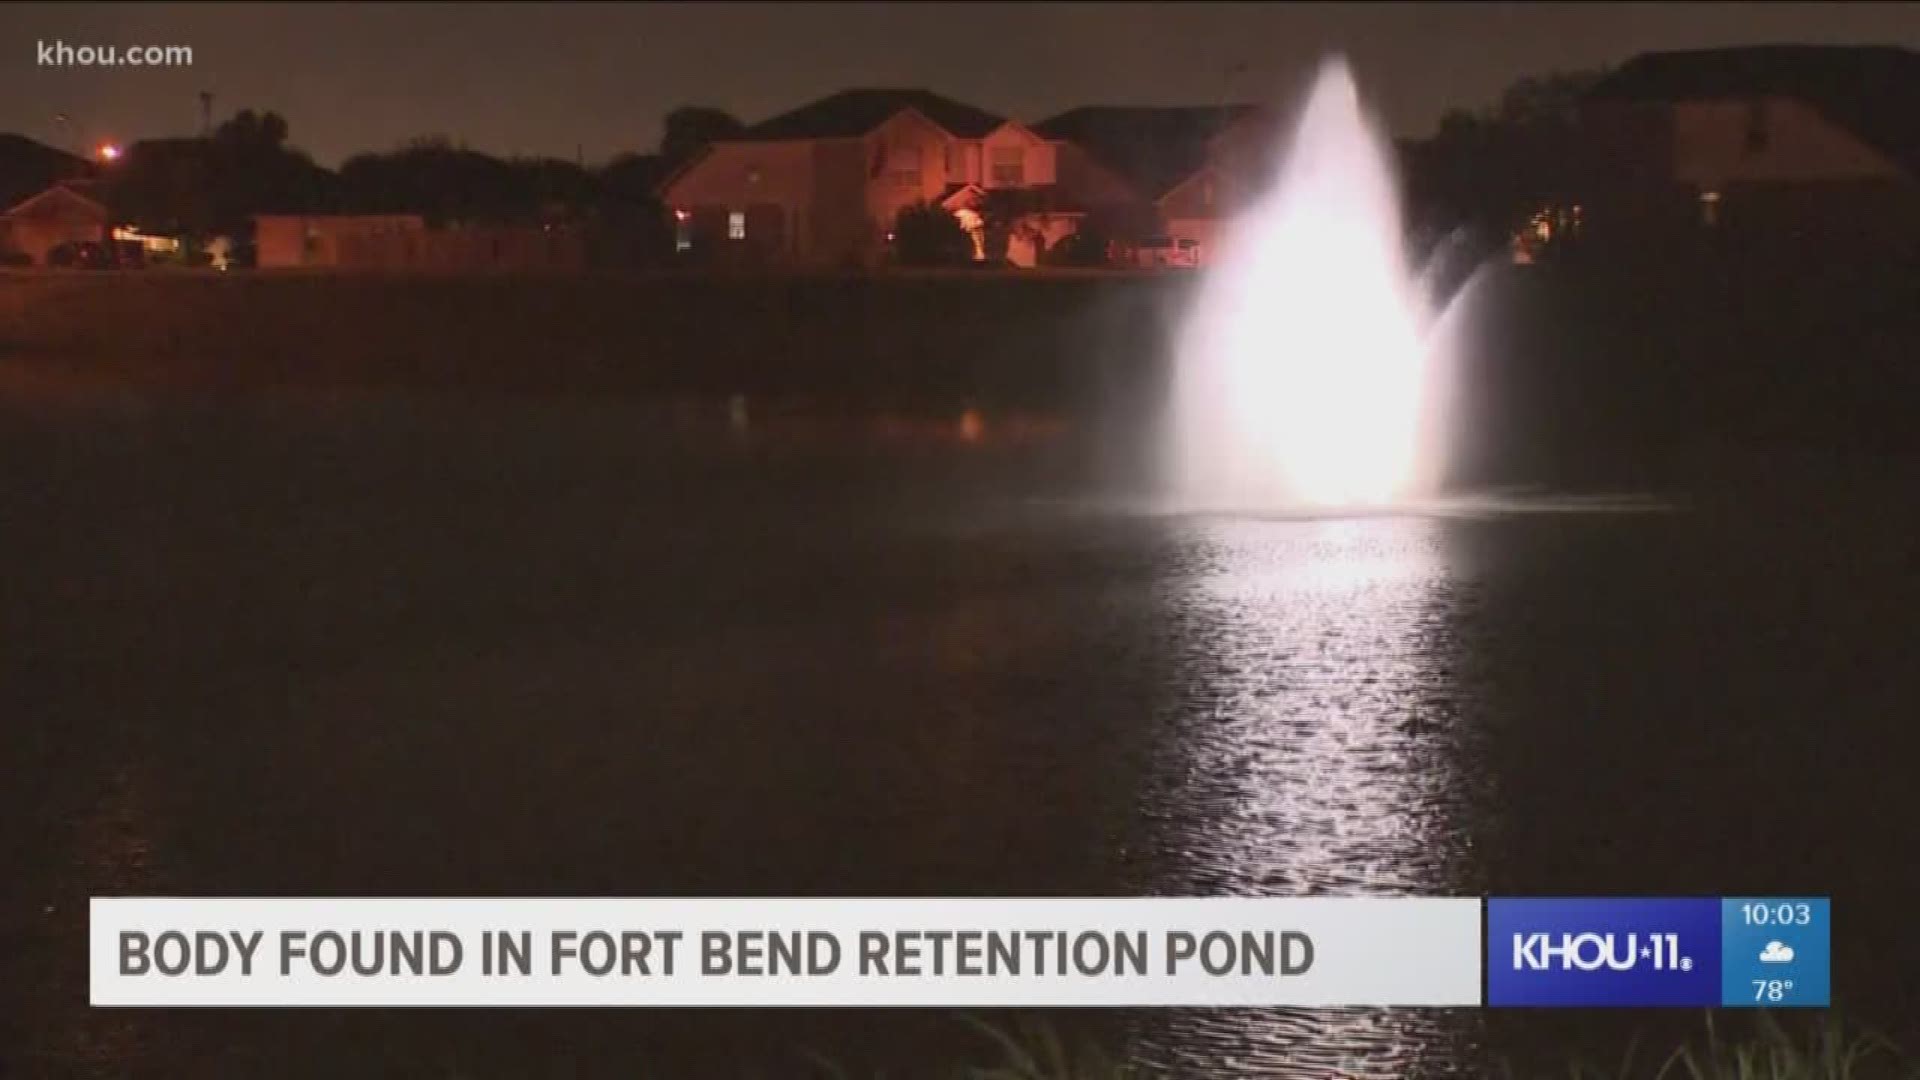 A woman's body was found in a retention pond Sunday night, according the Fort Bend County Sheriff's Office.